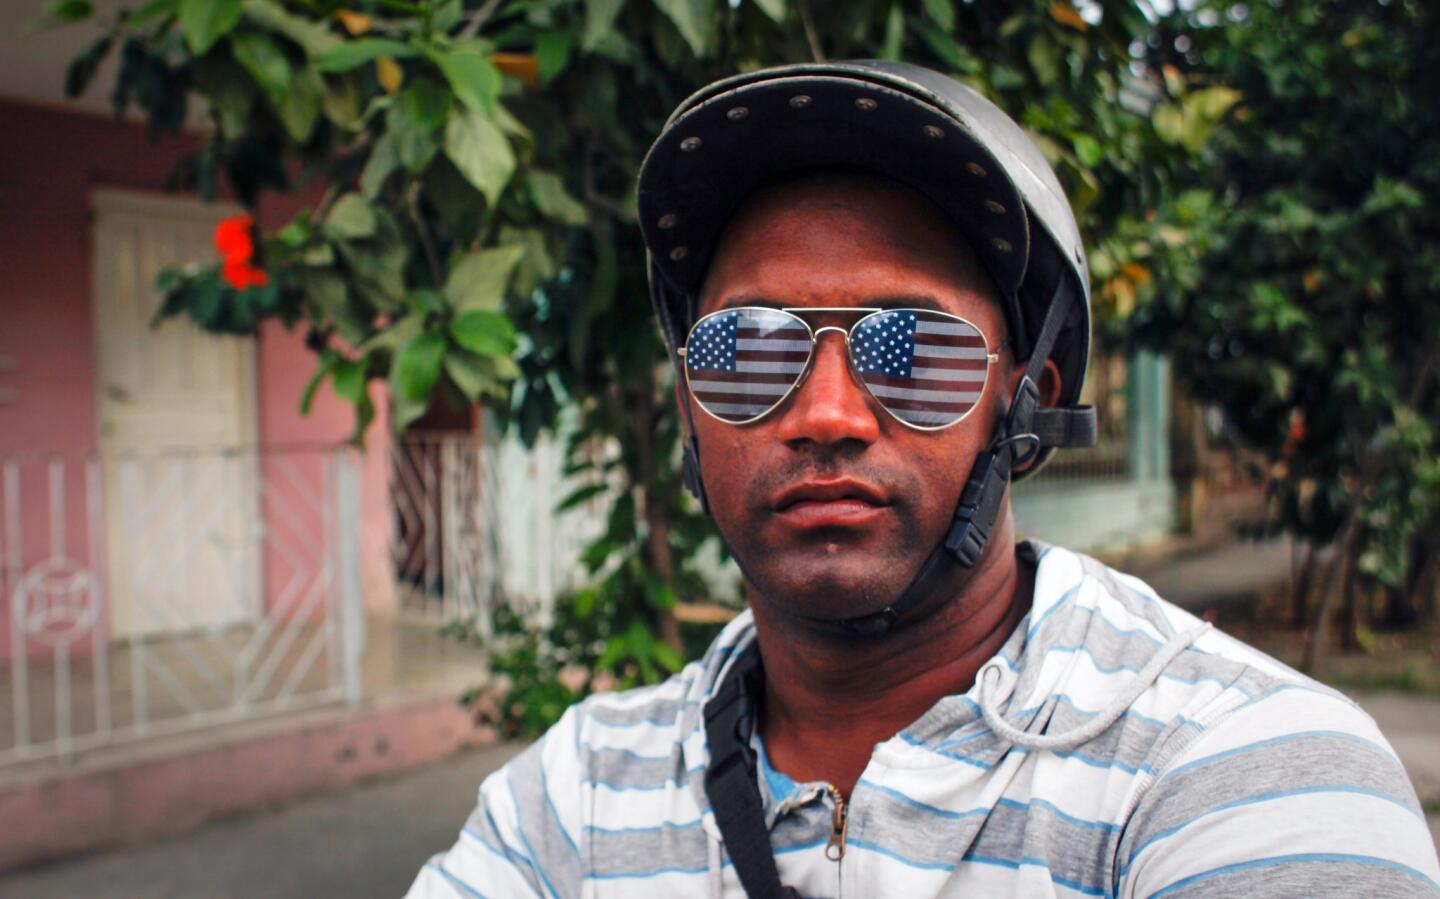 A man wears sunglasses with the U.S. flag in a street of Guantanamo, Cuba, on March 12, 2016.